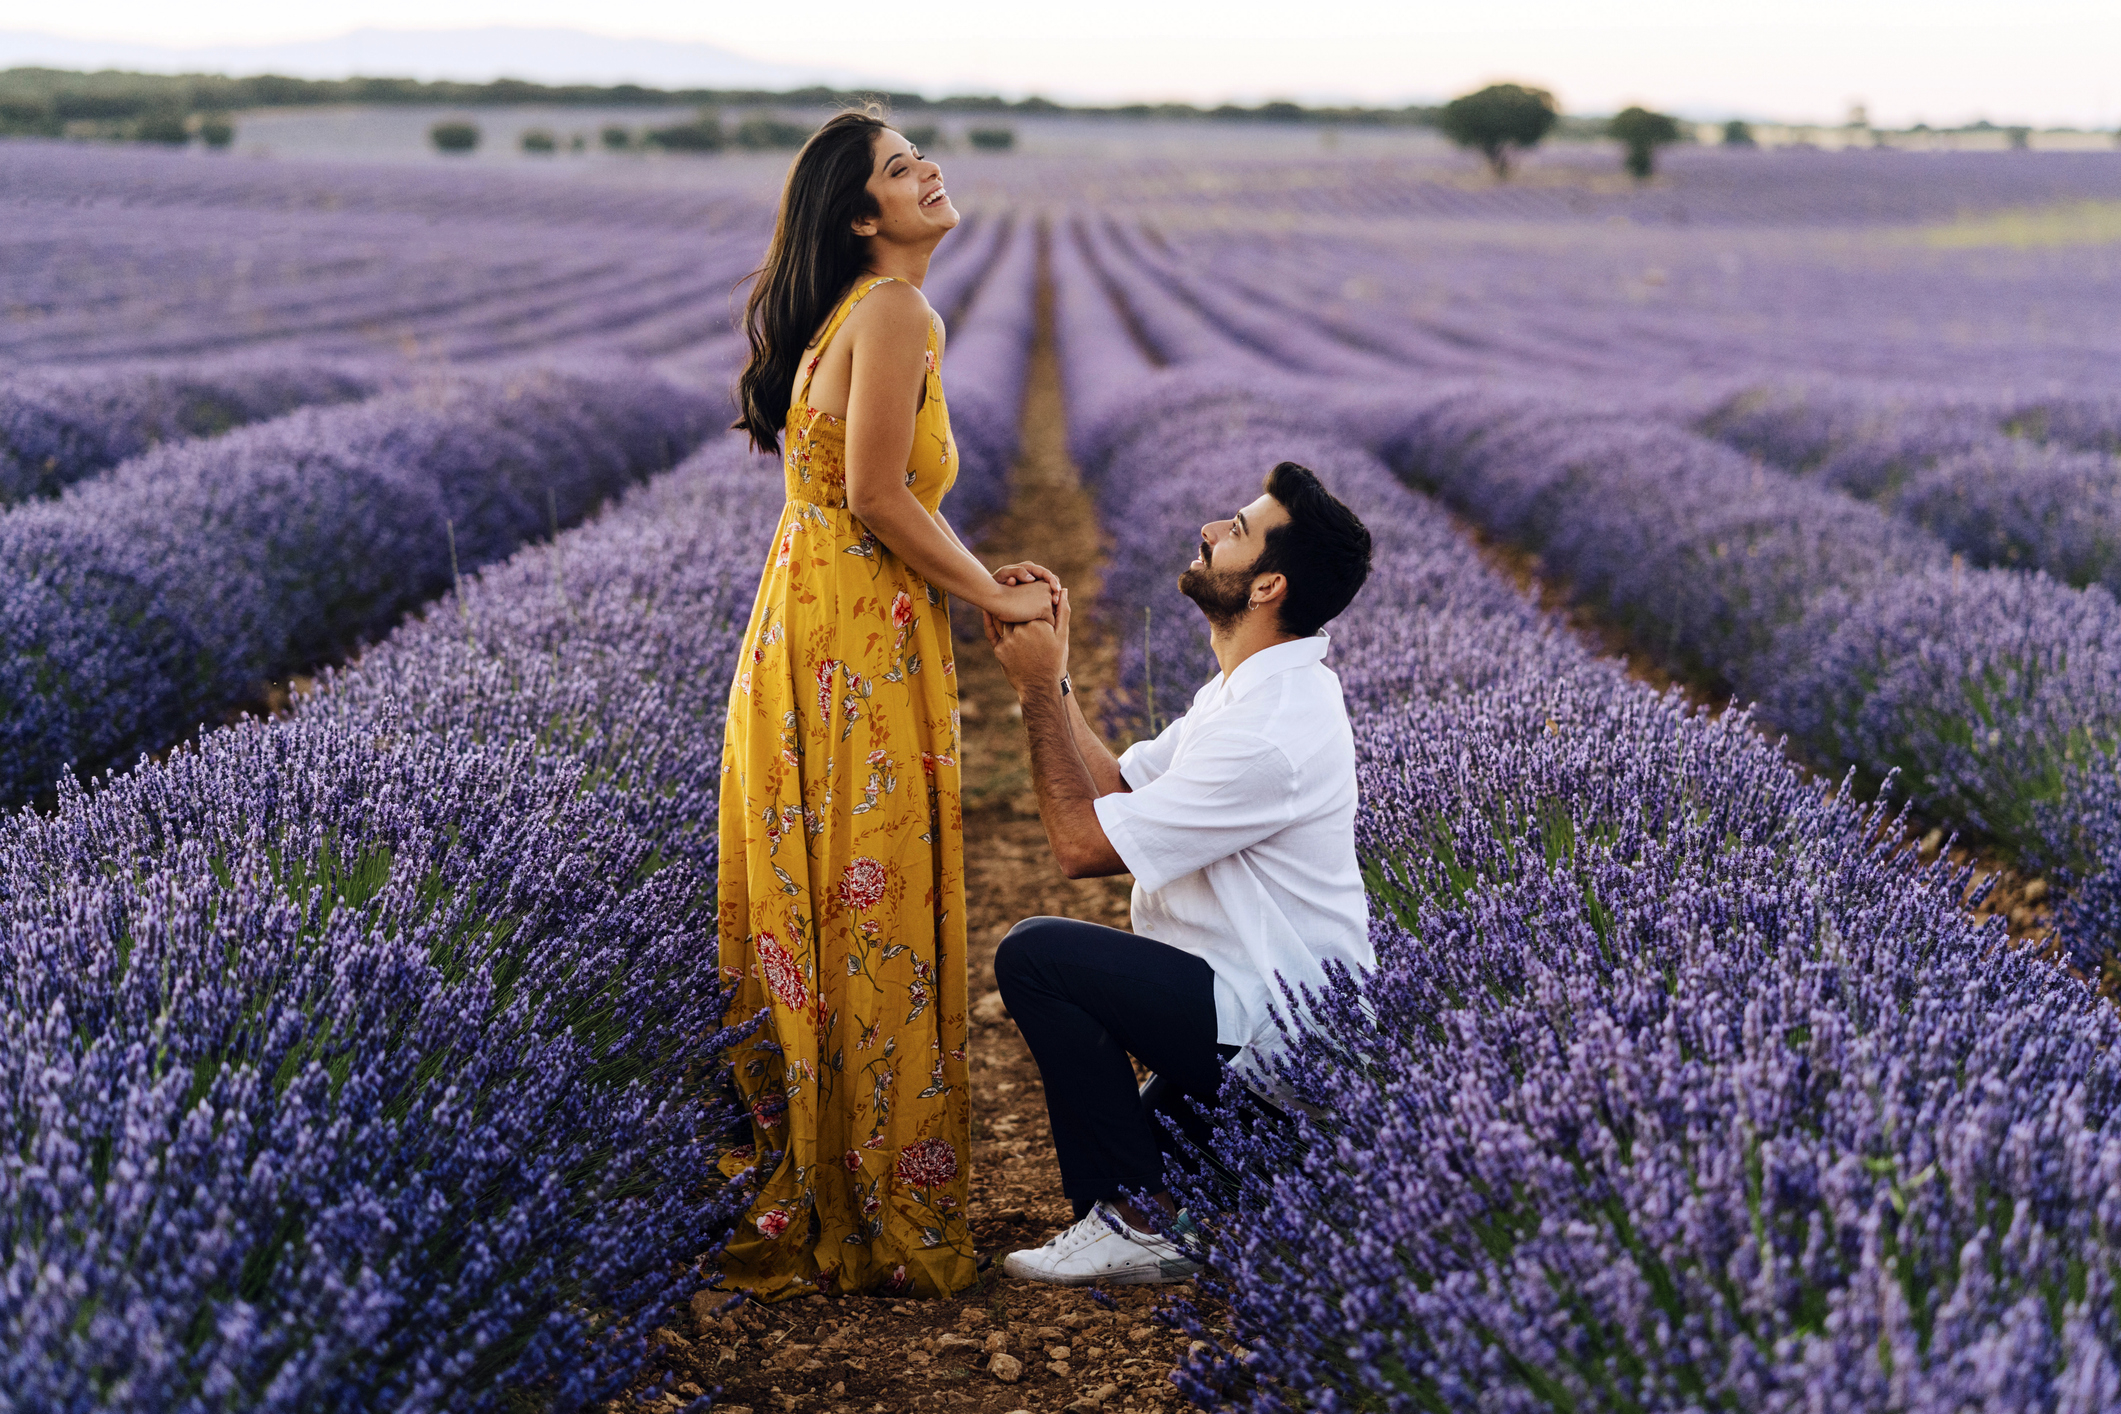 Person proposing in a lavender field, partner standing, surprised; both dressed in semi-formal attire